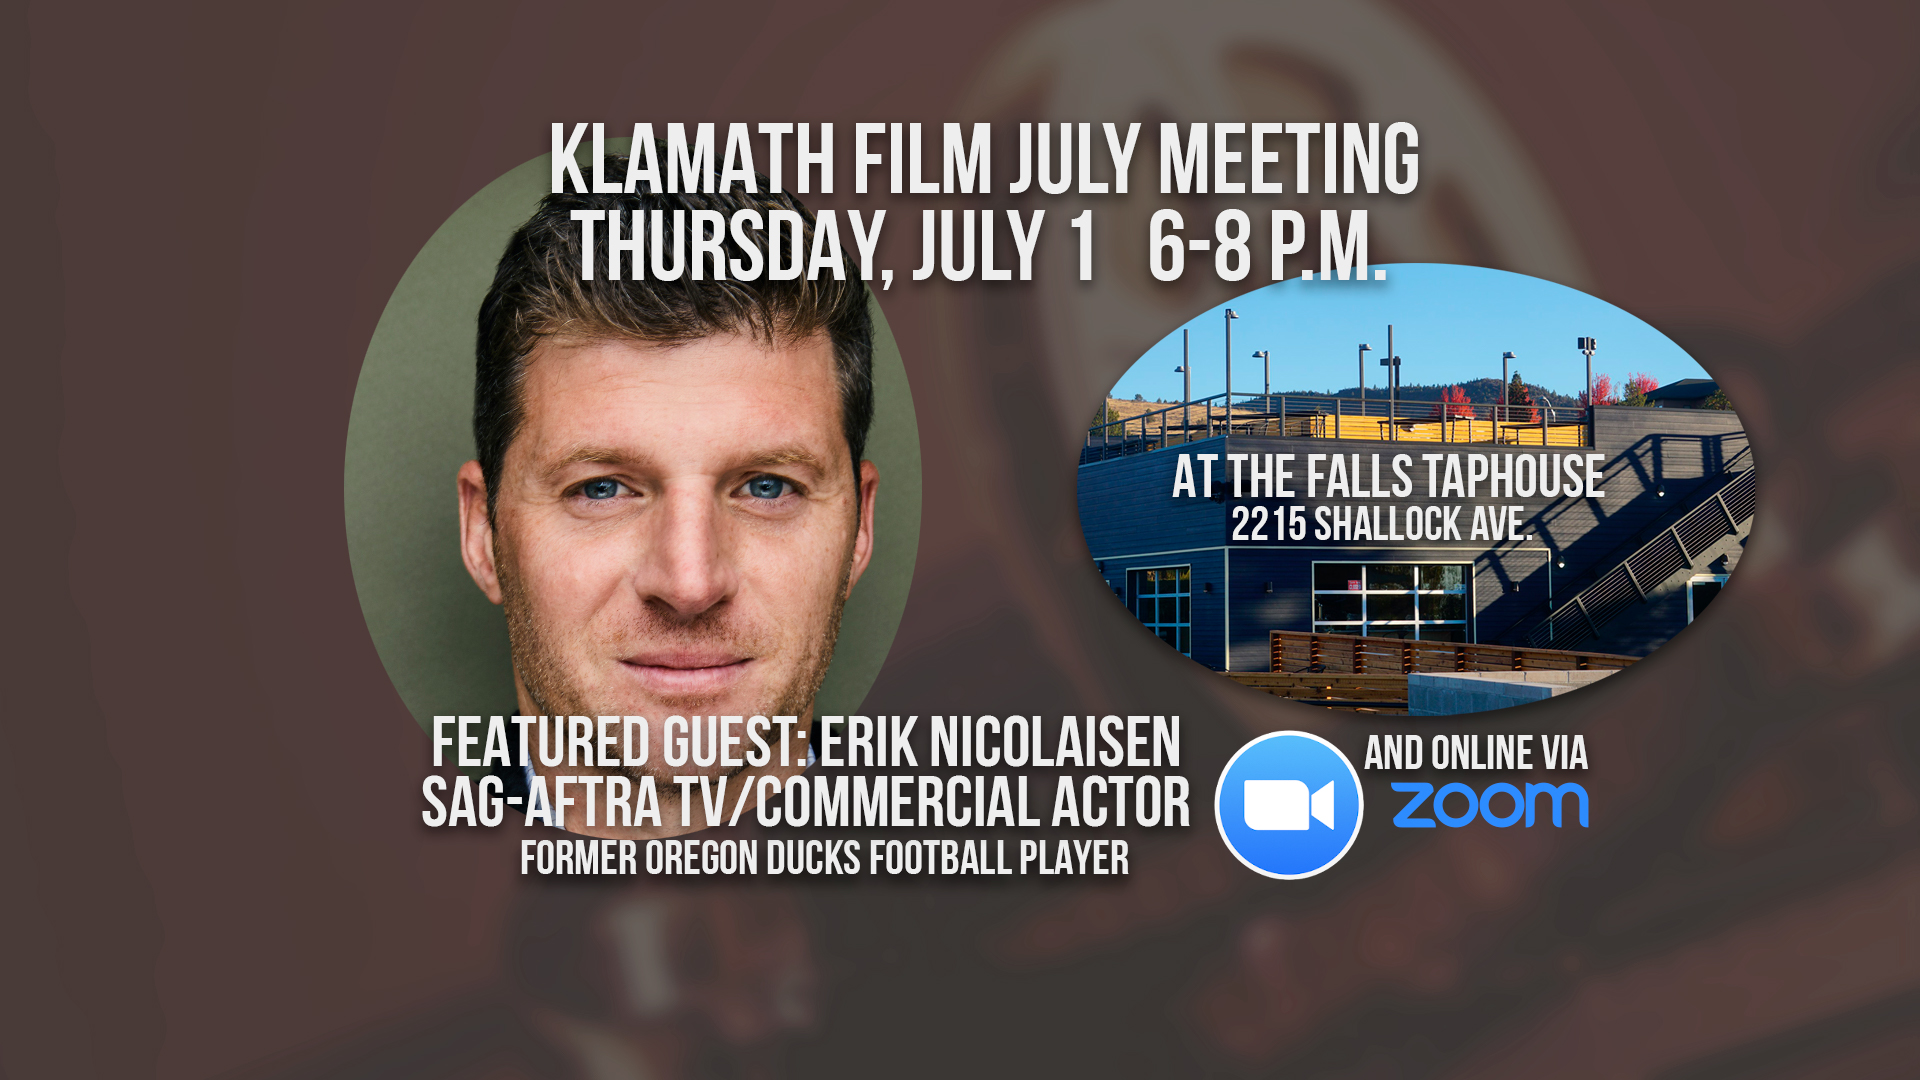 July member meeting at the Falls Taphouse features talk with actor/former Oregon Ducks footballer Erik Nicolaisen